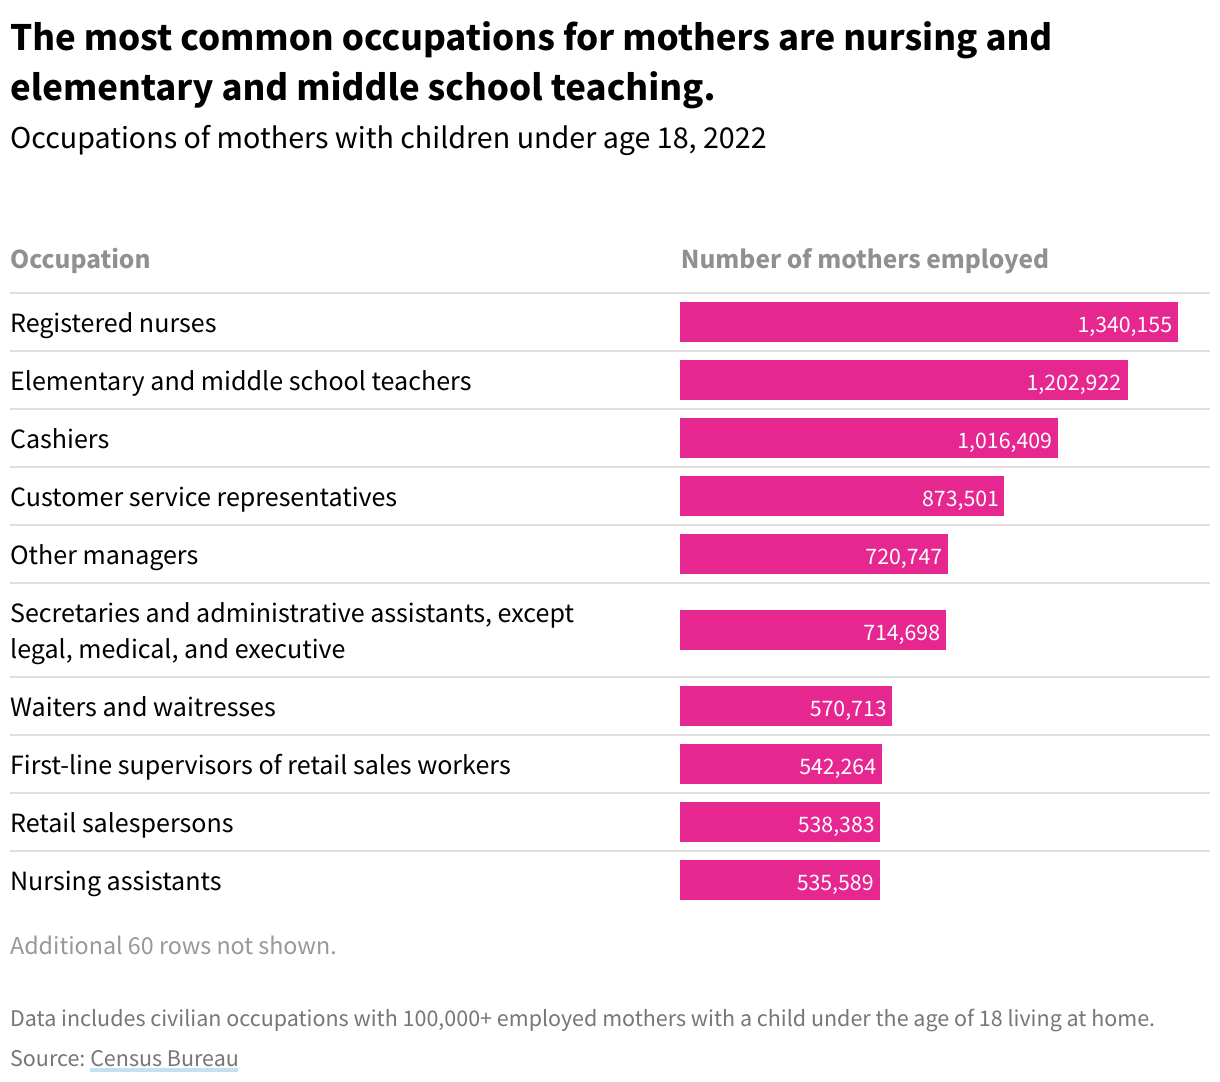 Table showing occupations employing the largest number of mothers, 2022. The most common occupations for mothers are registered nurses and elementary and middle school teachers.